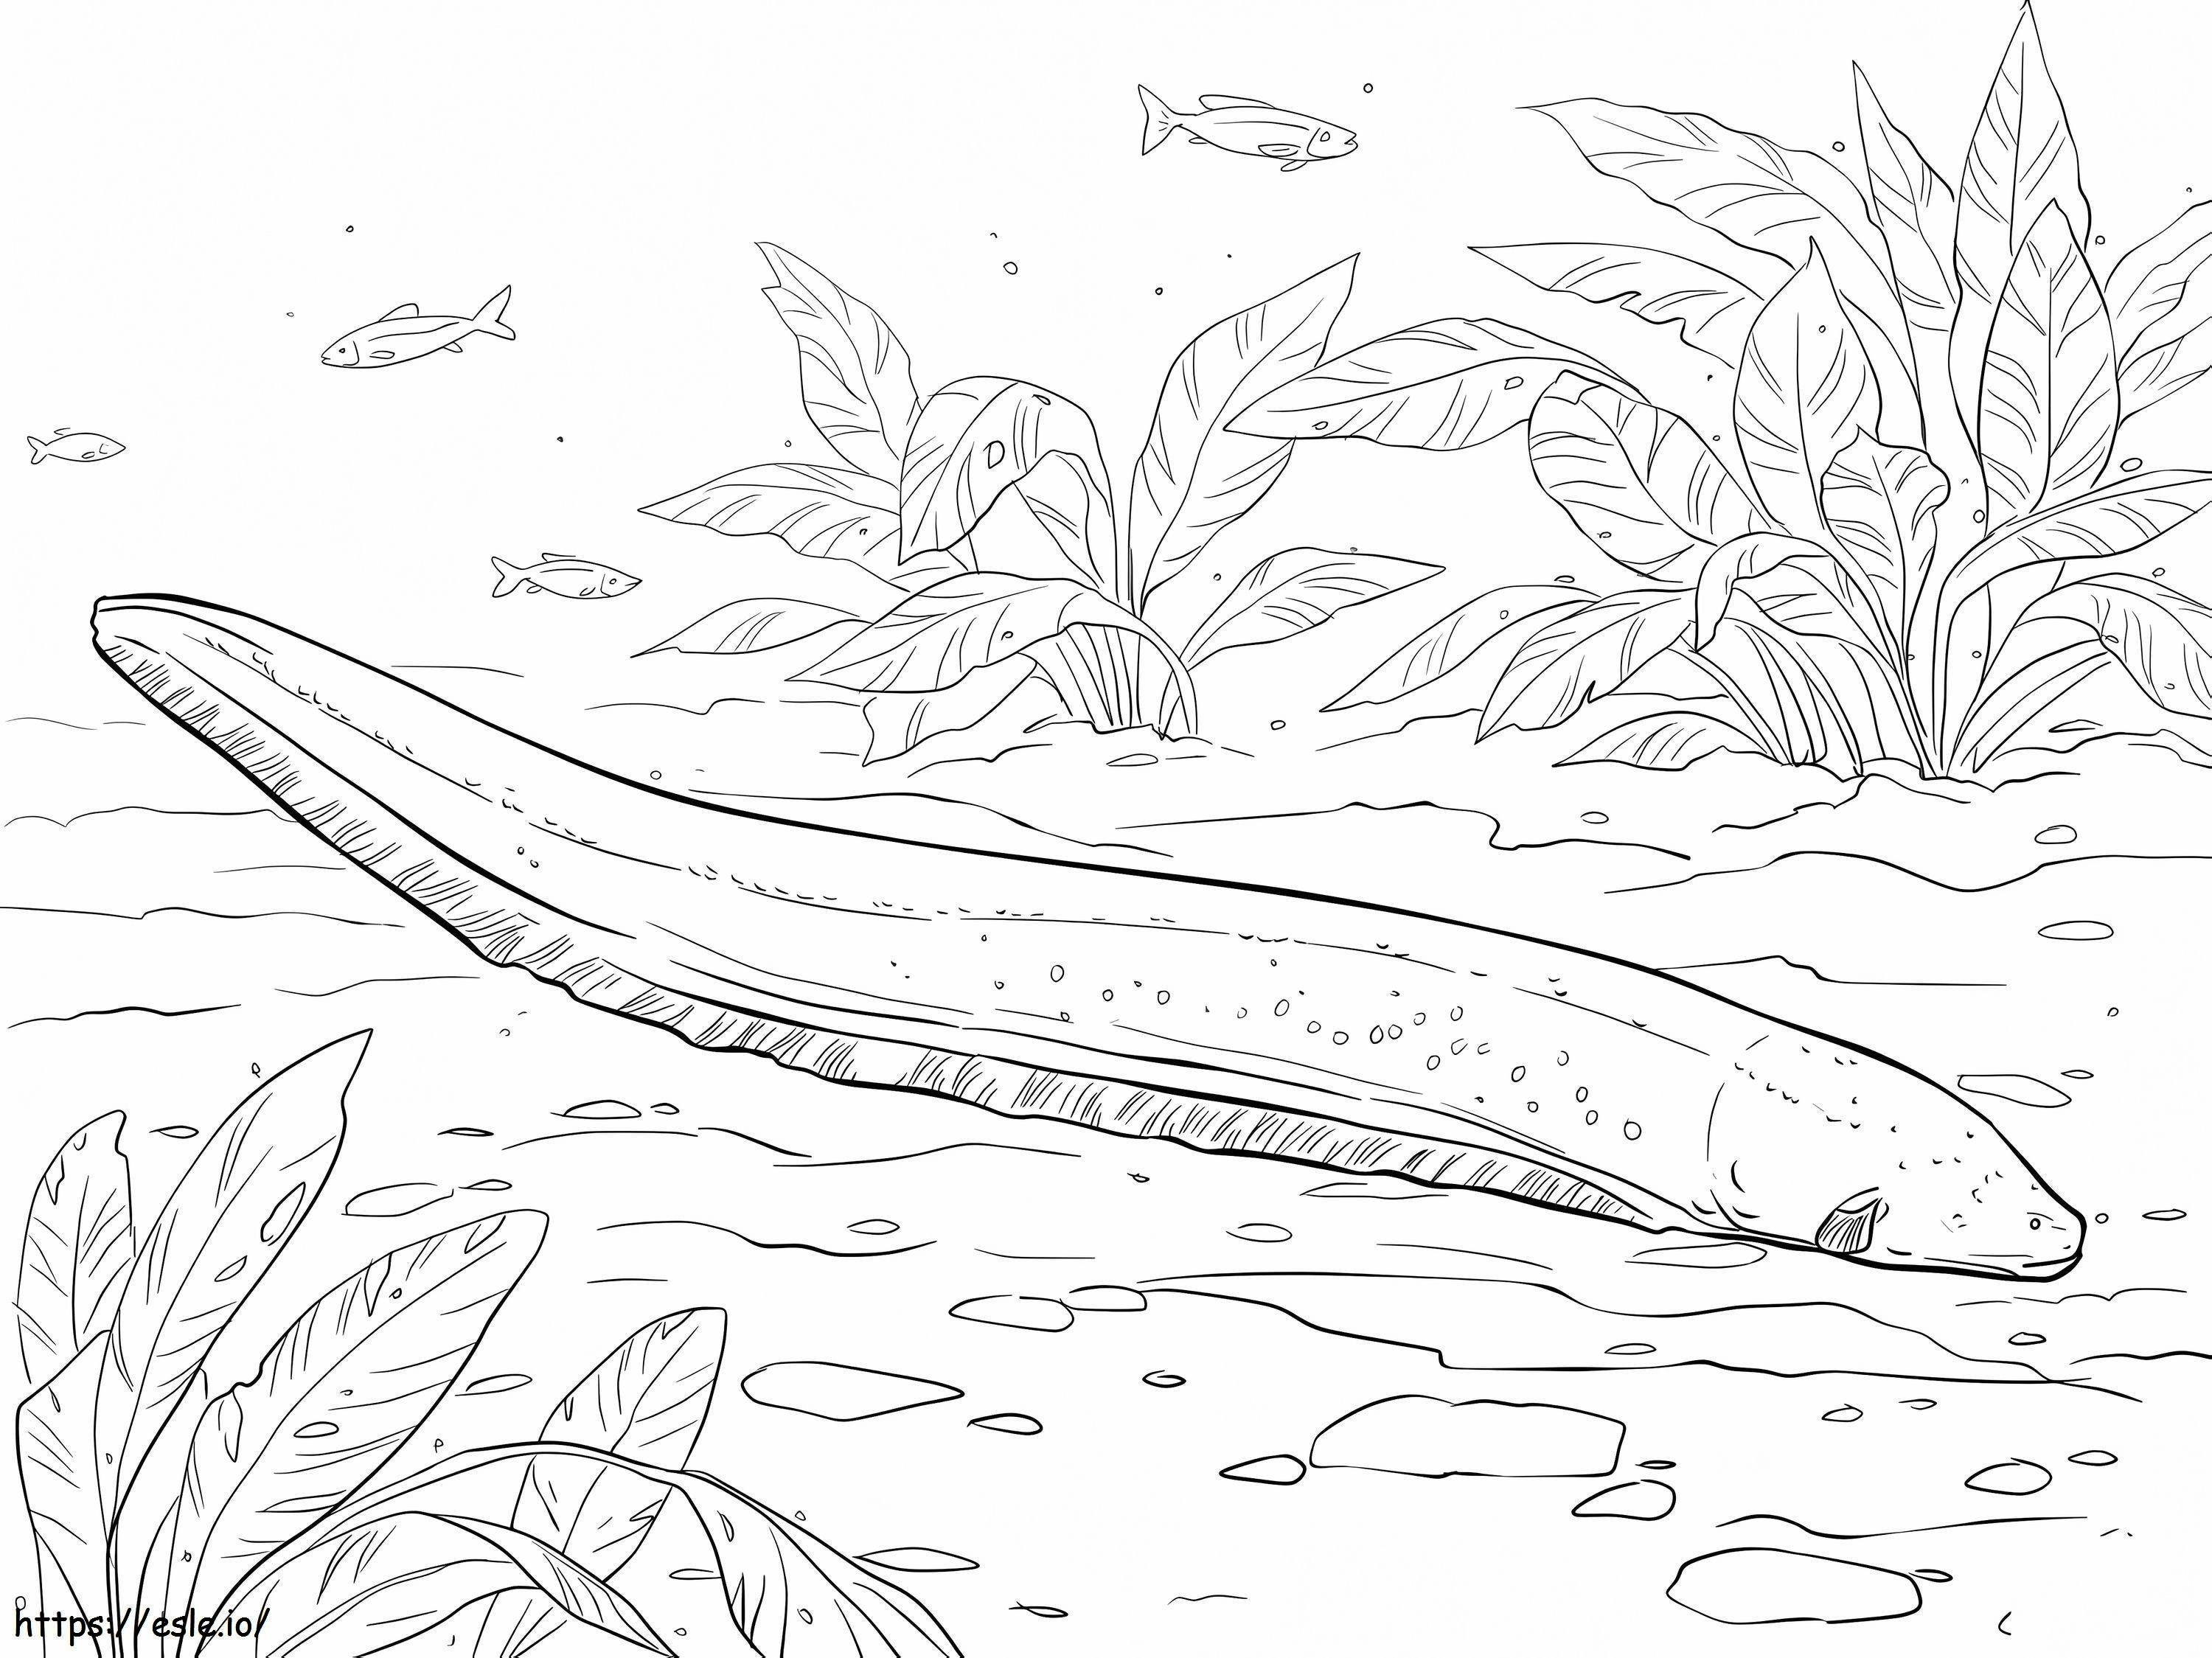 Electric Eel coloring page